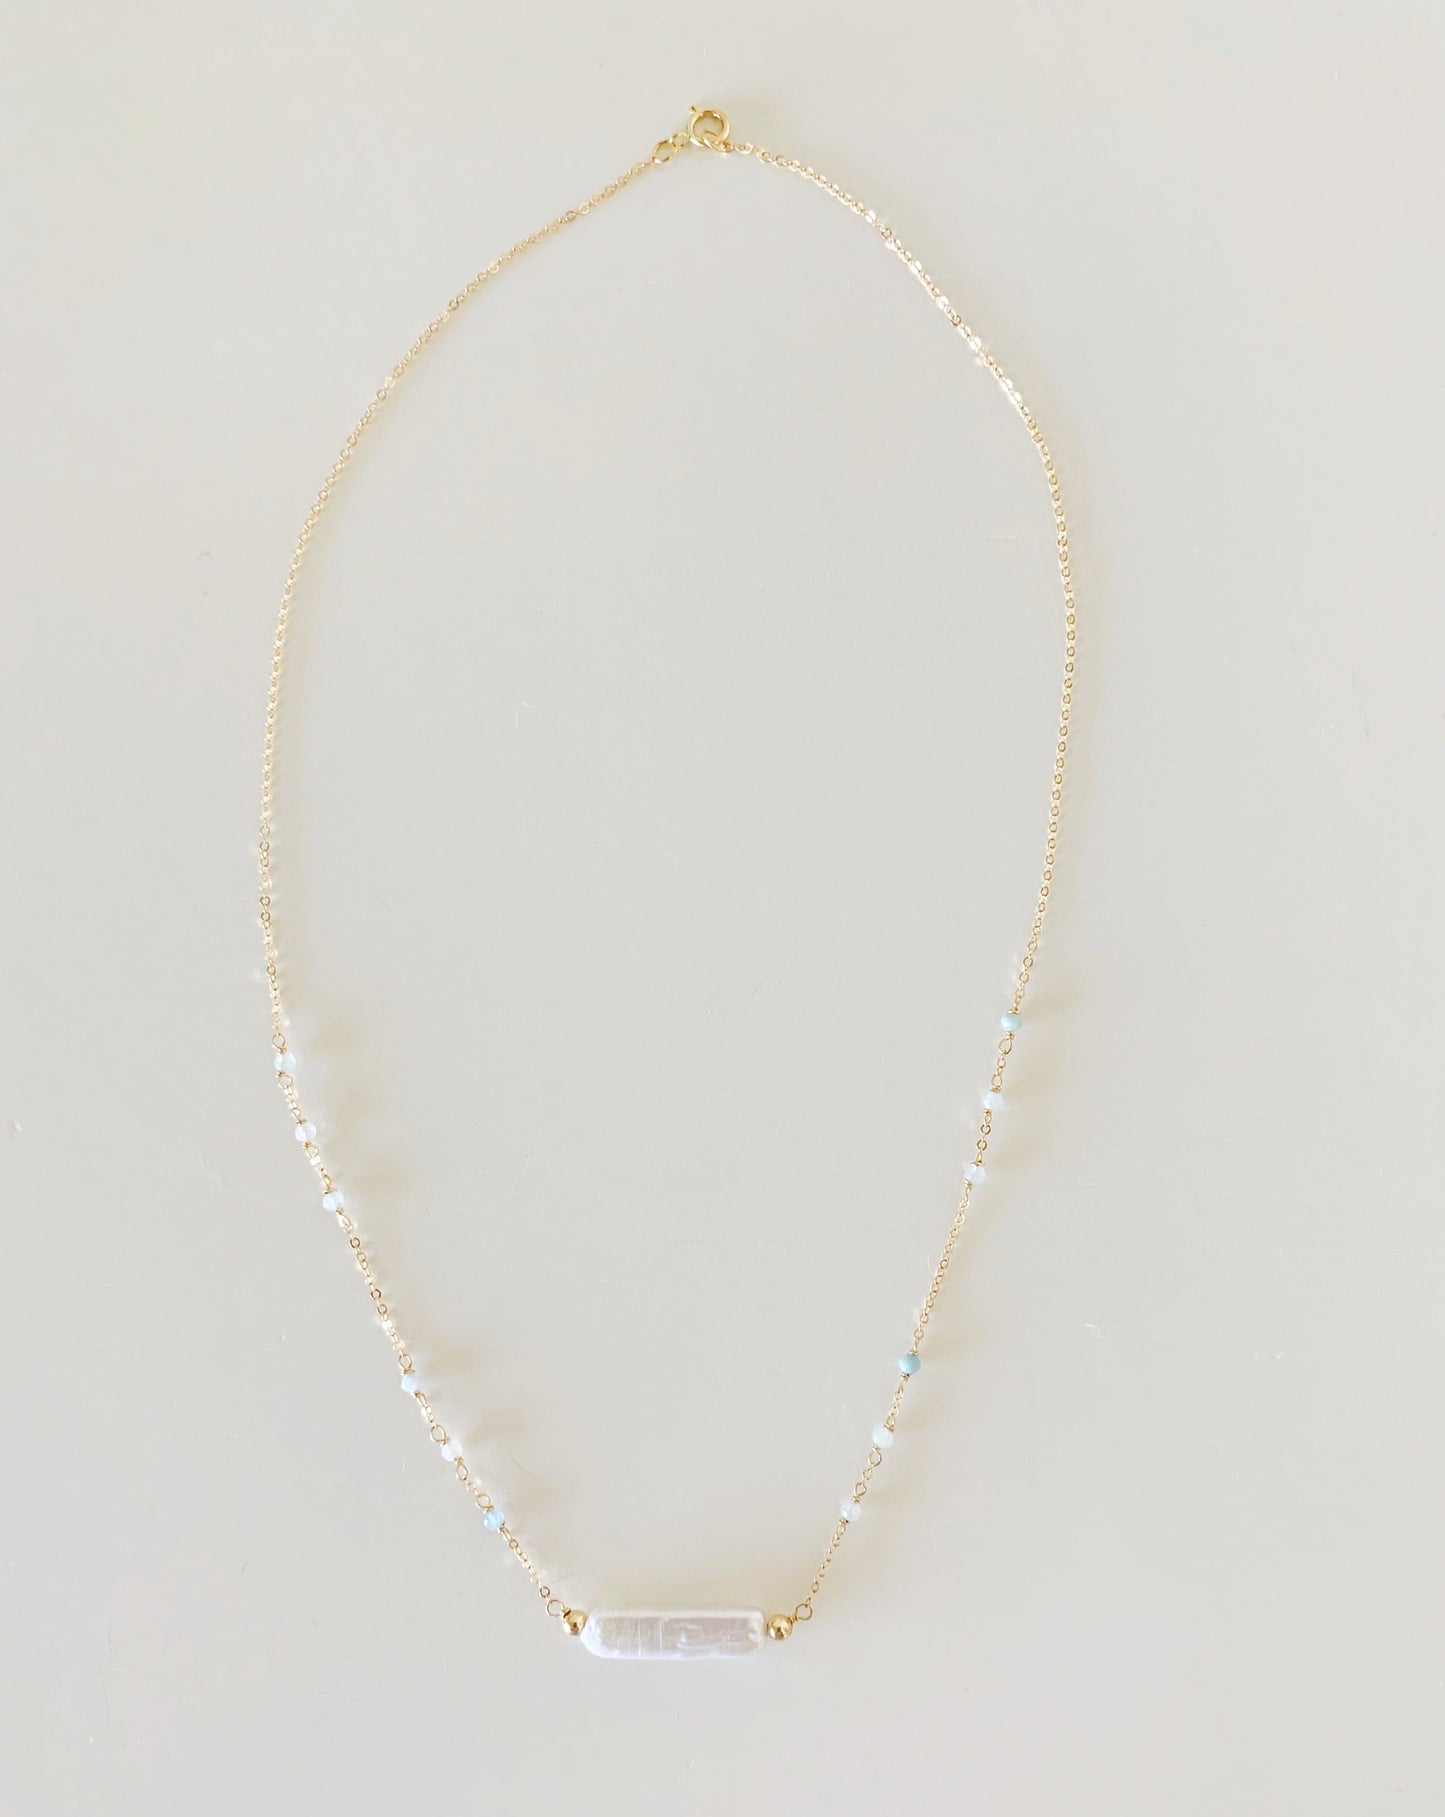 the truro necklace by mermaids and madeleines is created with 14k gold filled chain dotted with microfaceted aquamarine beads with a freshwater stick pearl at the center. this is a full length view of the necklace photographed on a white background